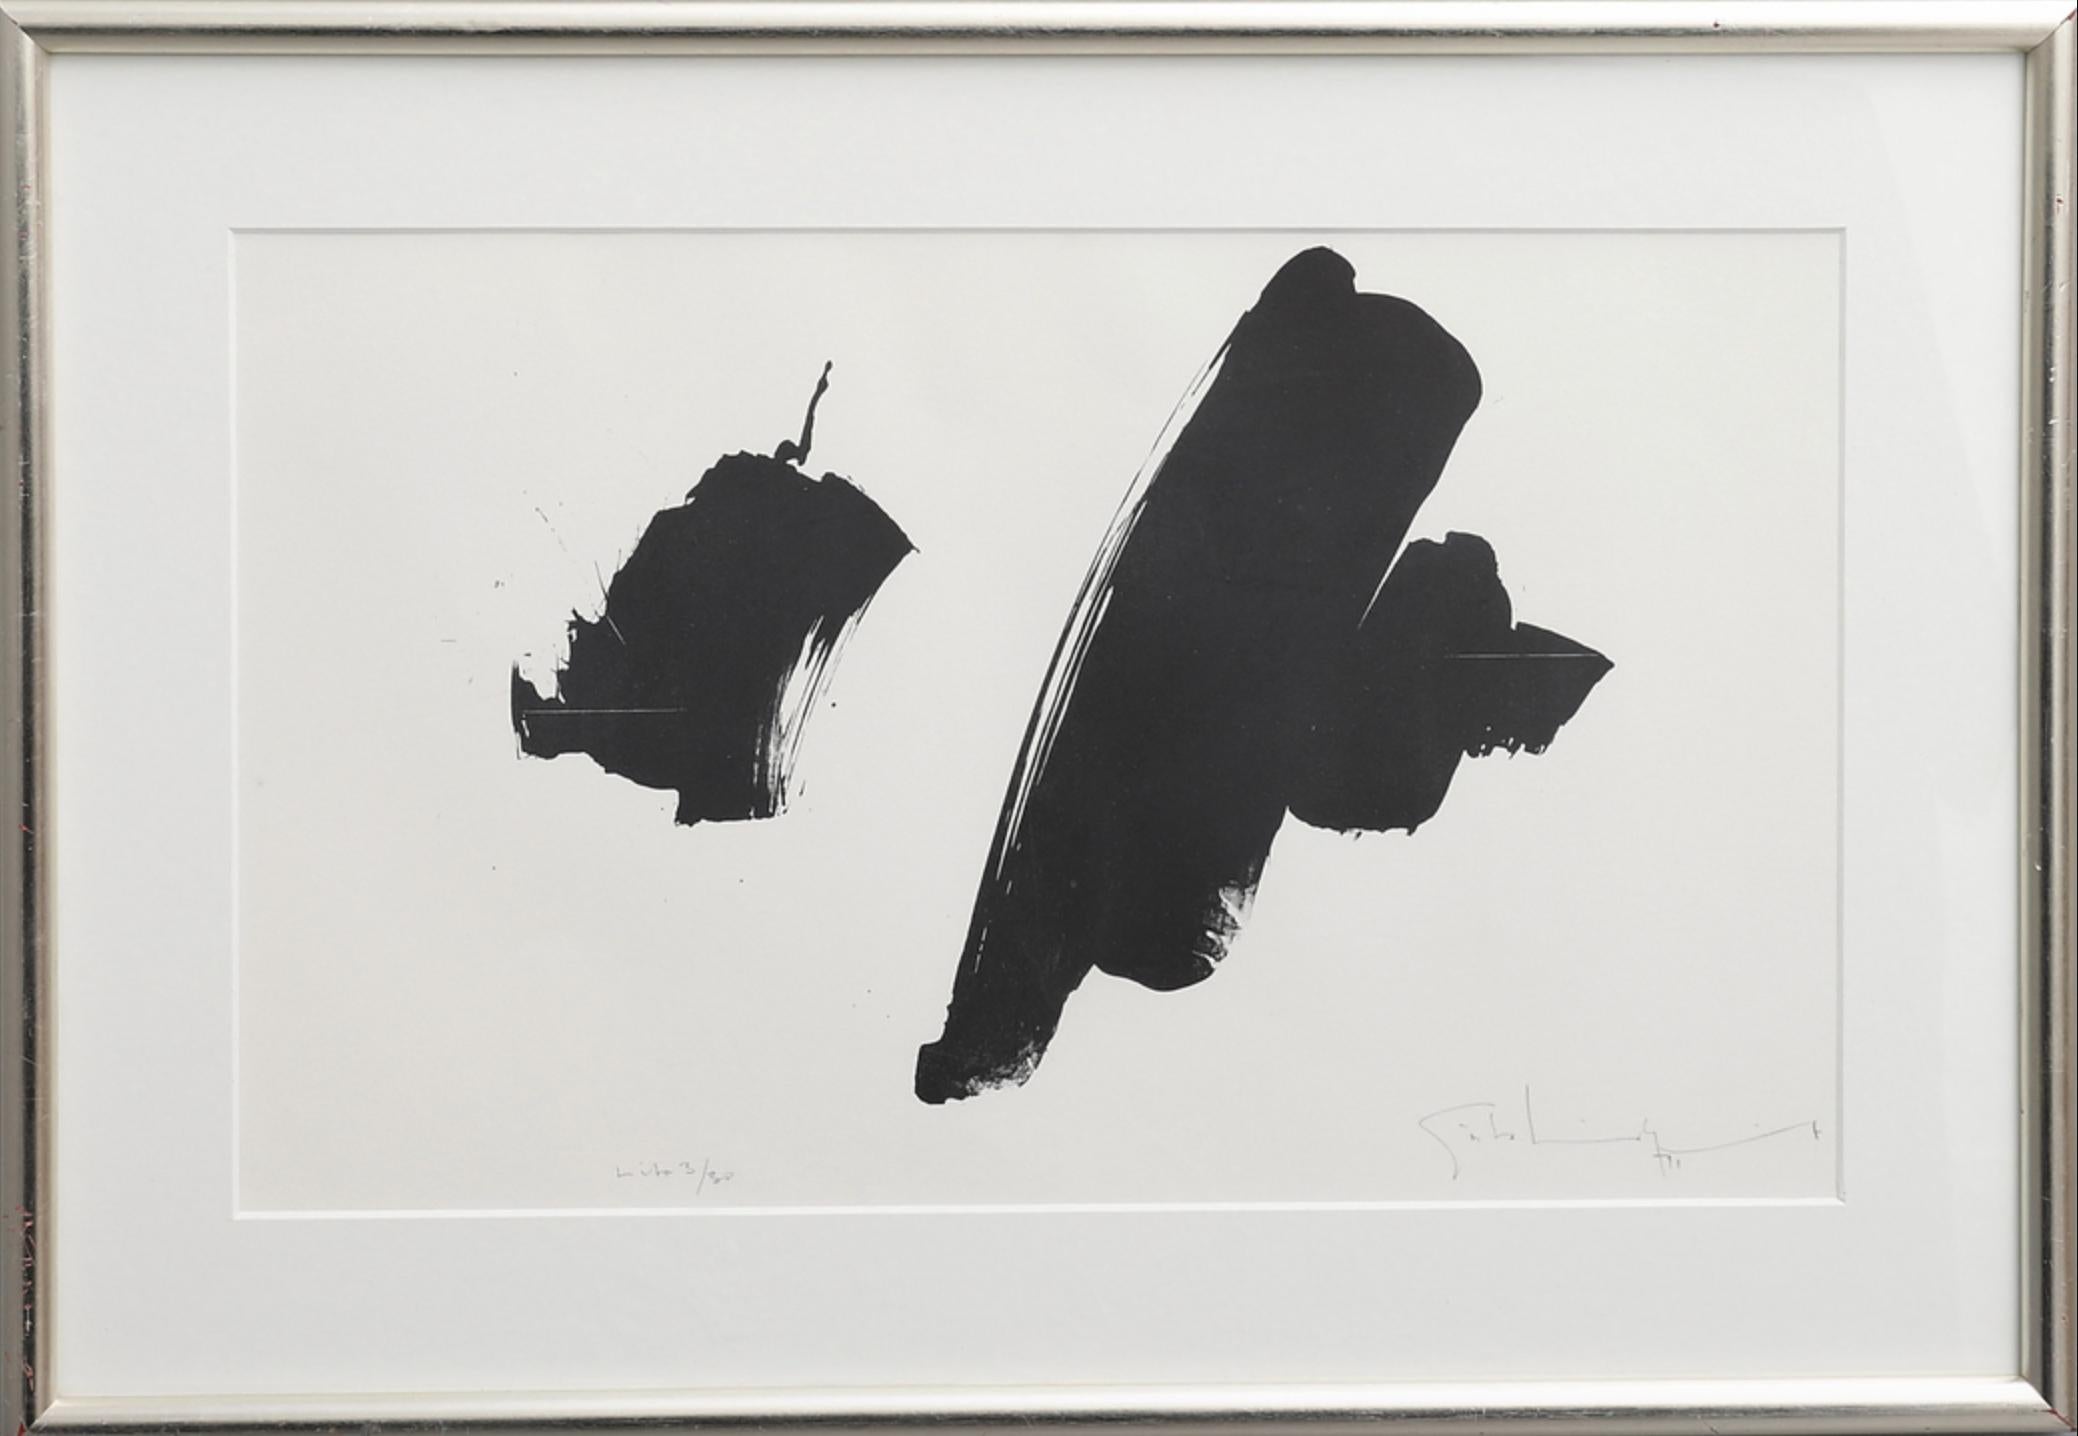 Framed Monochrome Lithograph By Gösta Lindqvist, Signed, Numbered 3/30 For Sale 5